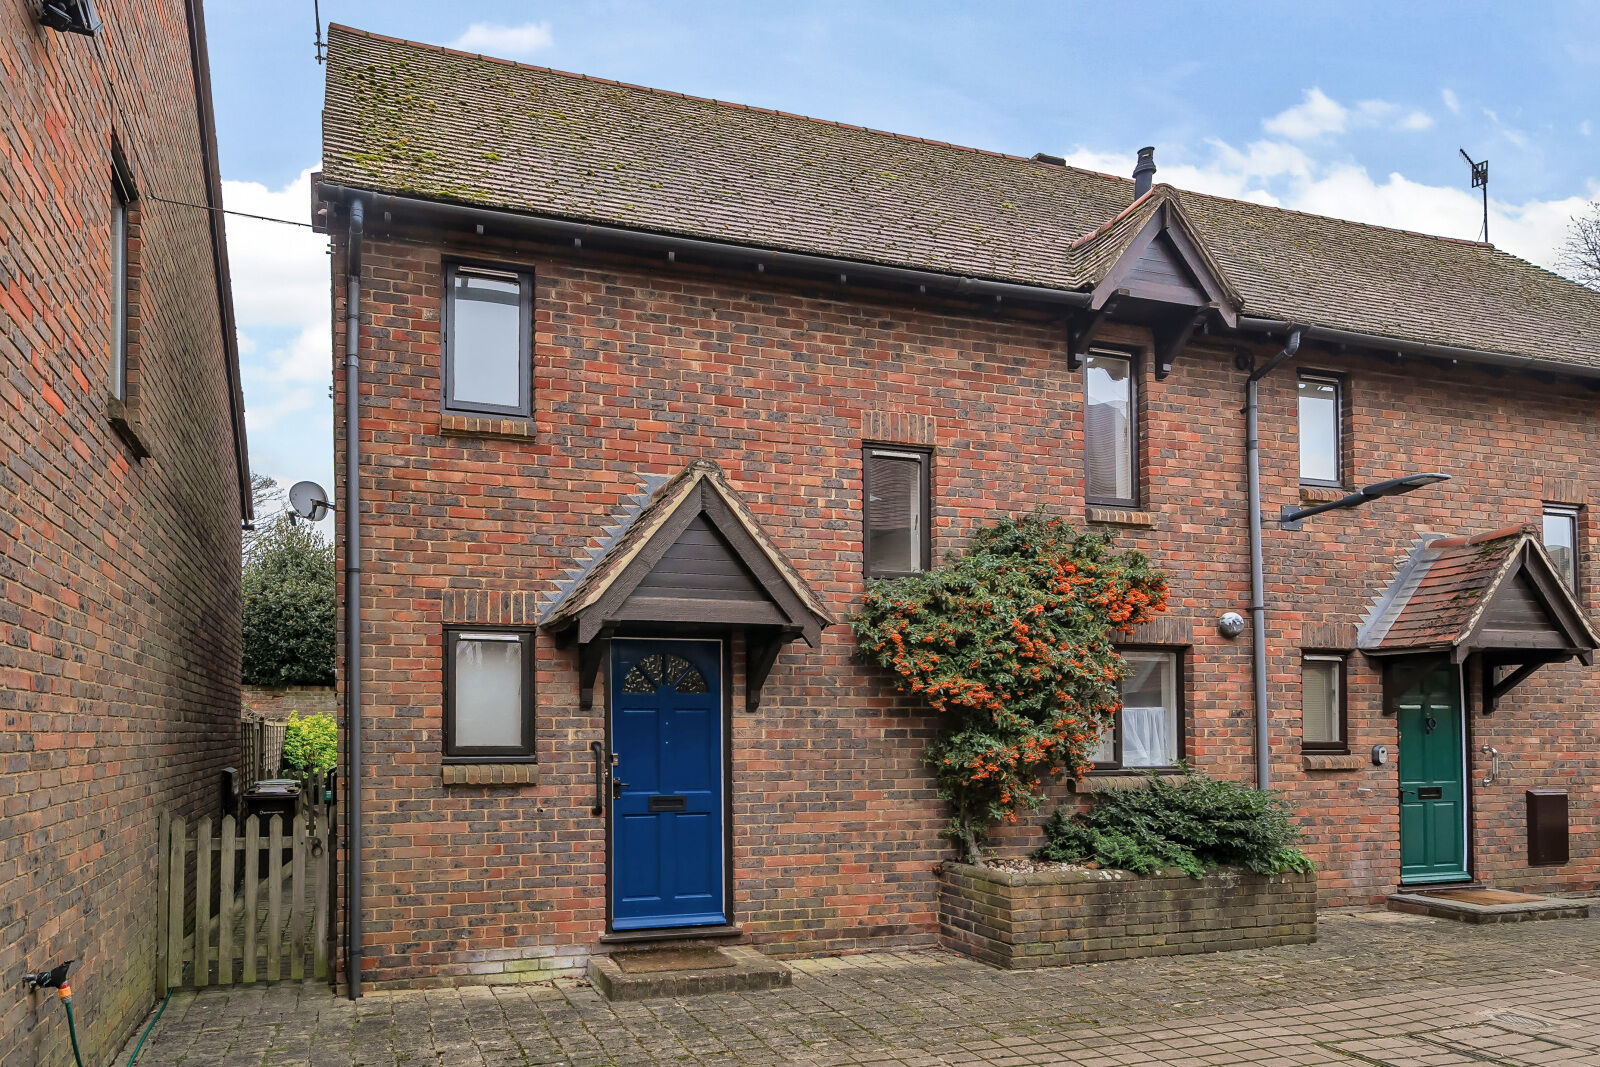 3 bedroom end terraced house for sale Adam Court, Henley-on-Thames, RG9, main image